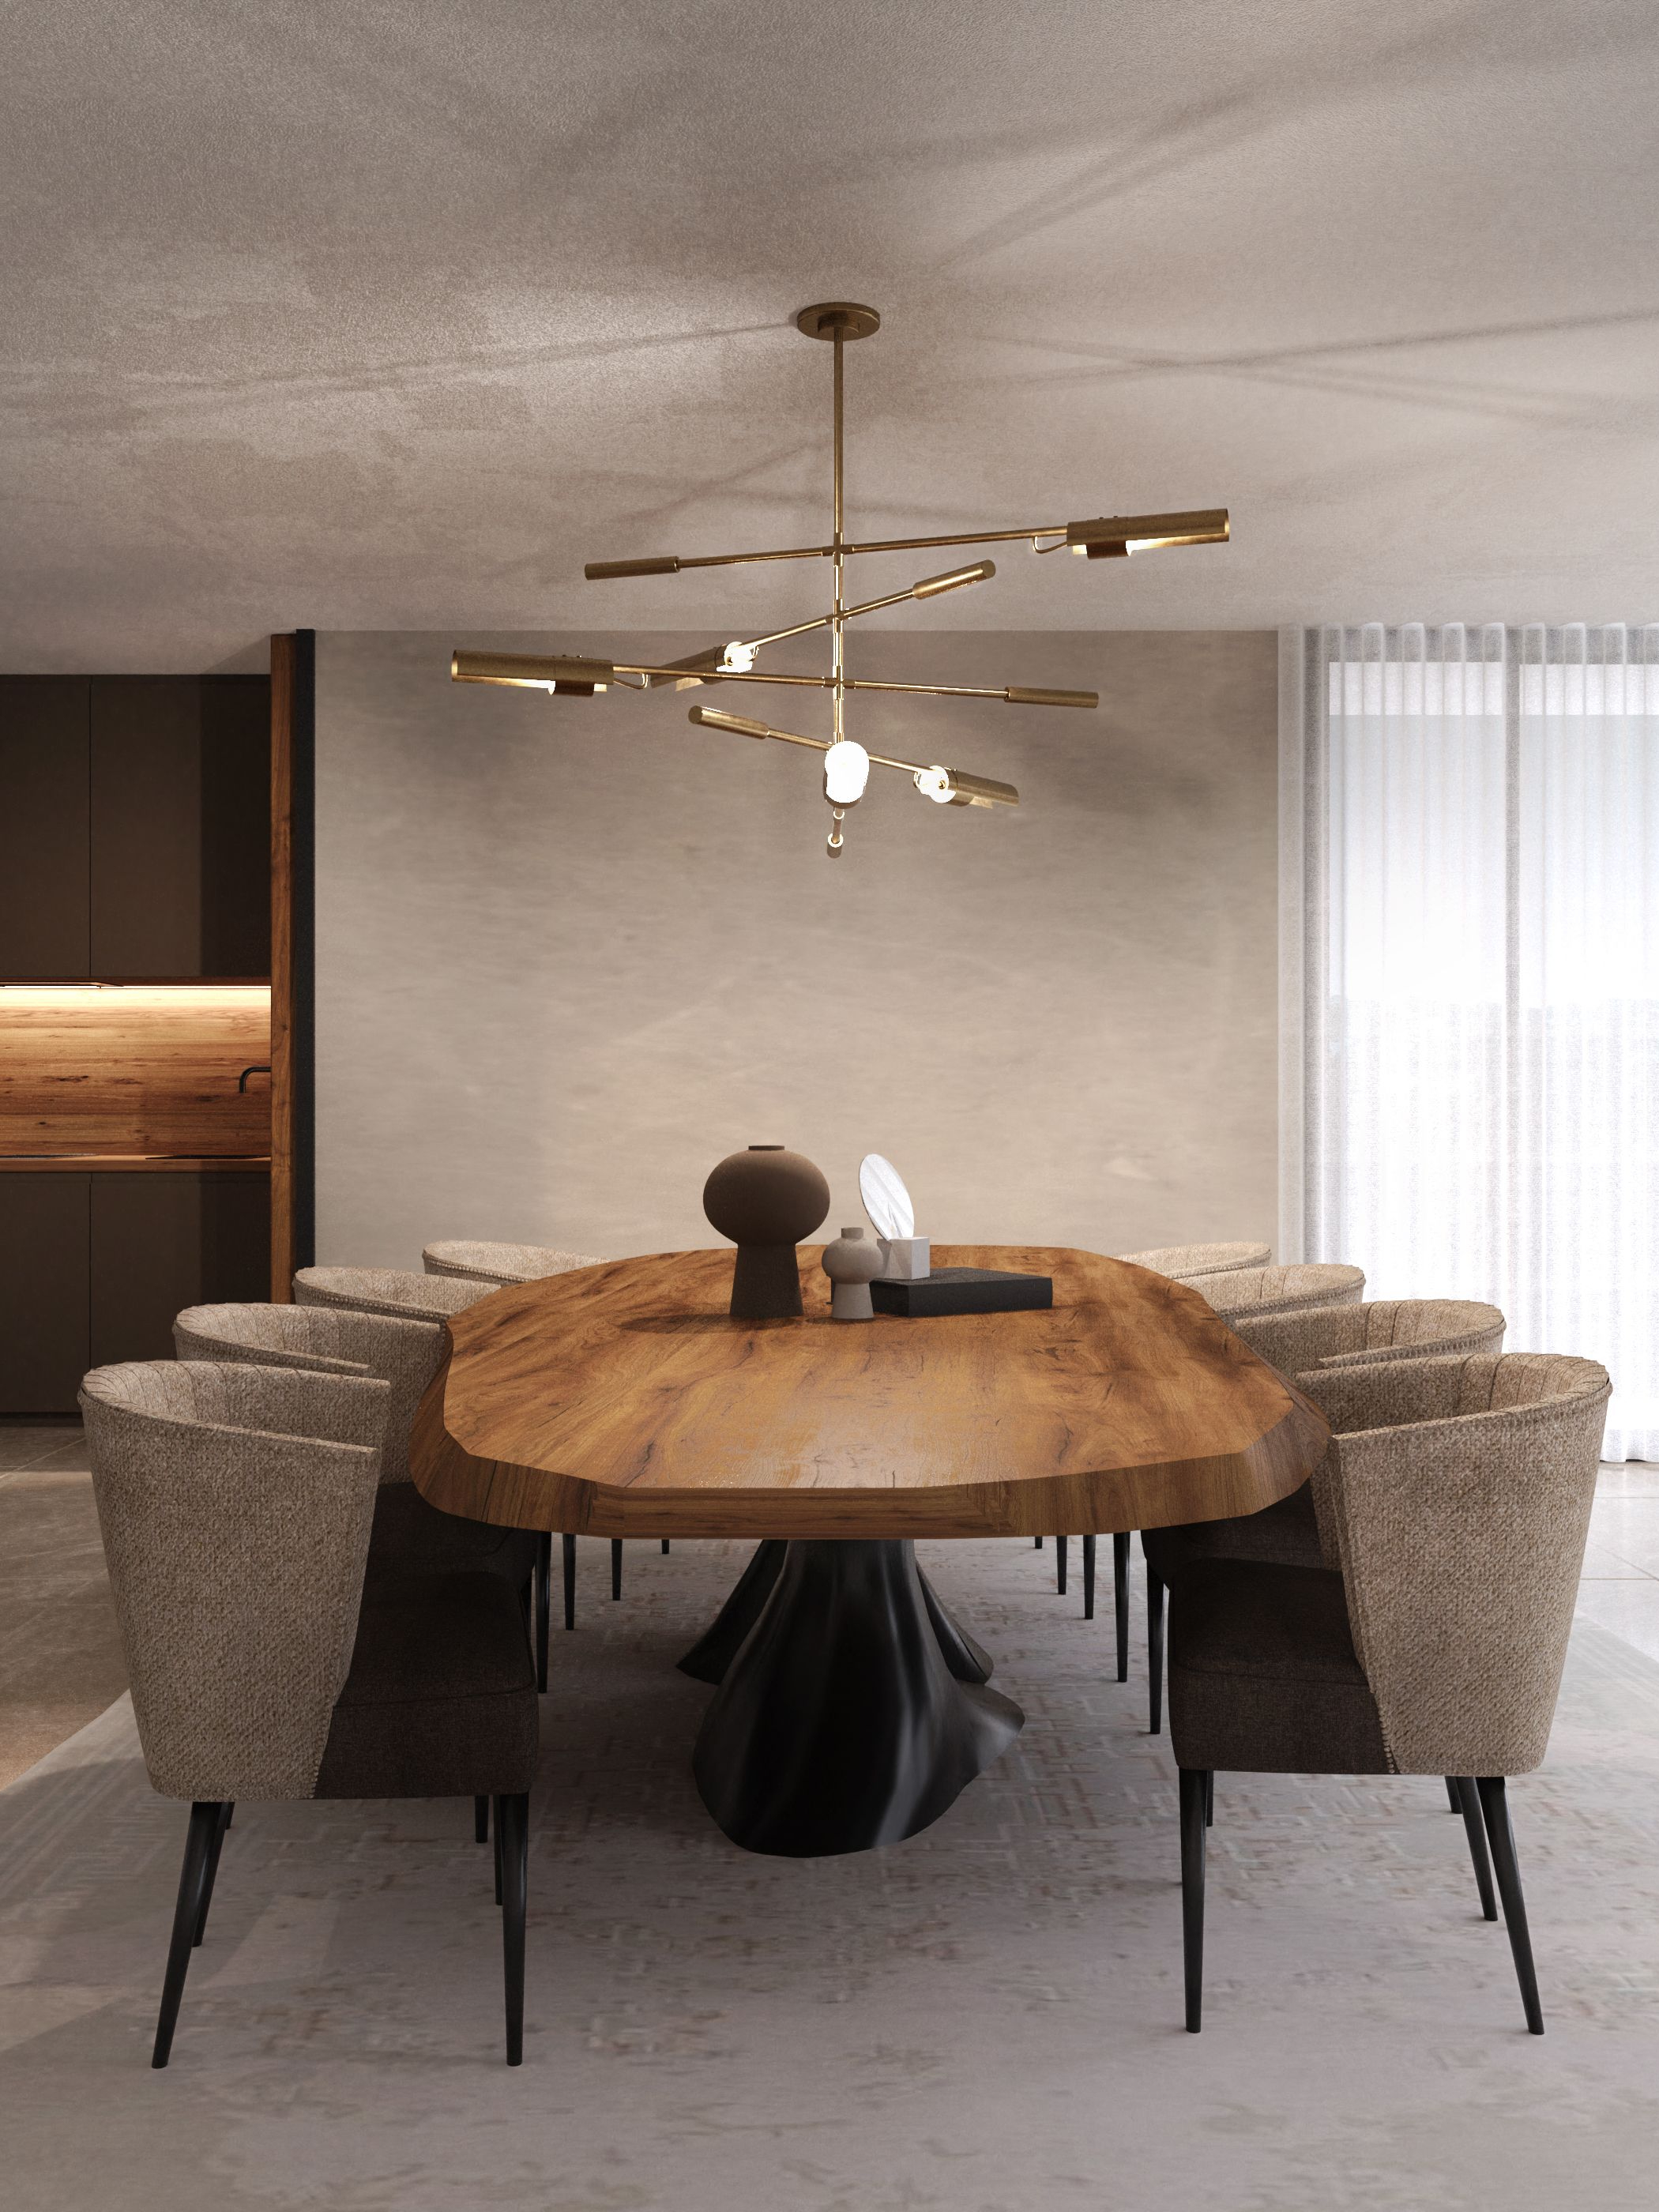 Modern Dining Room Design With Neutral Tones - Home'Society